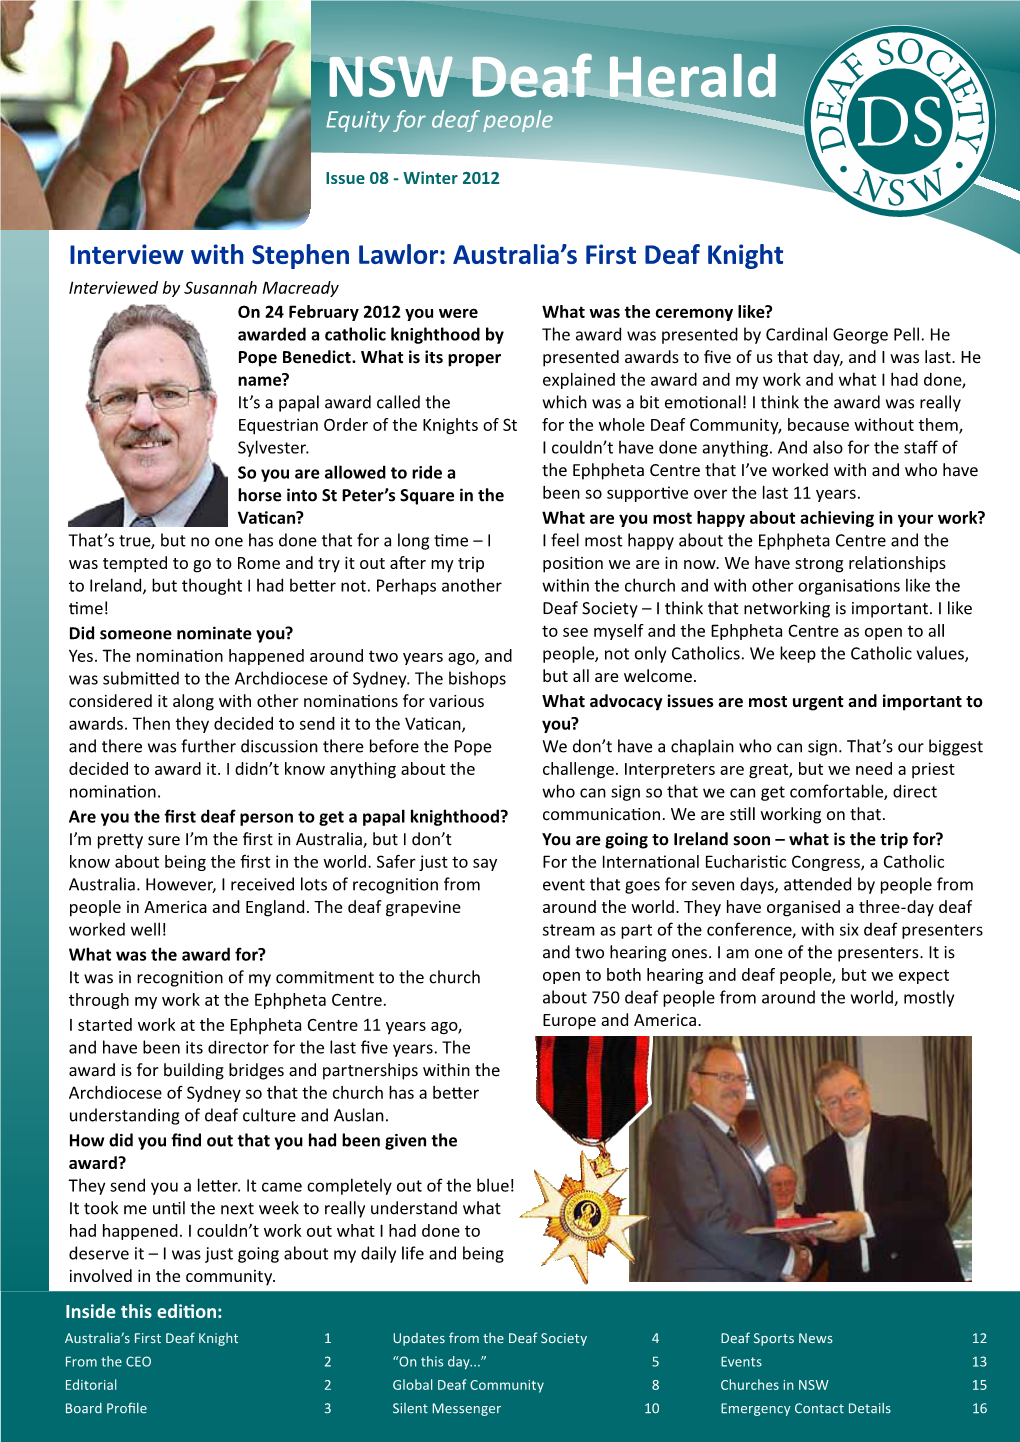 NSW Deaf Herald Equity for Deaf People